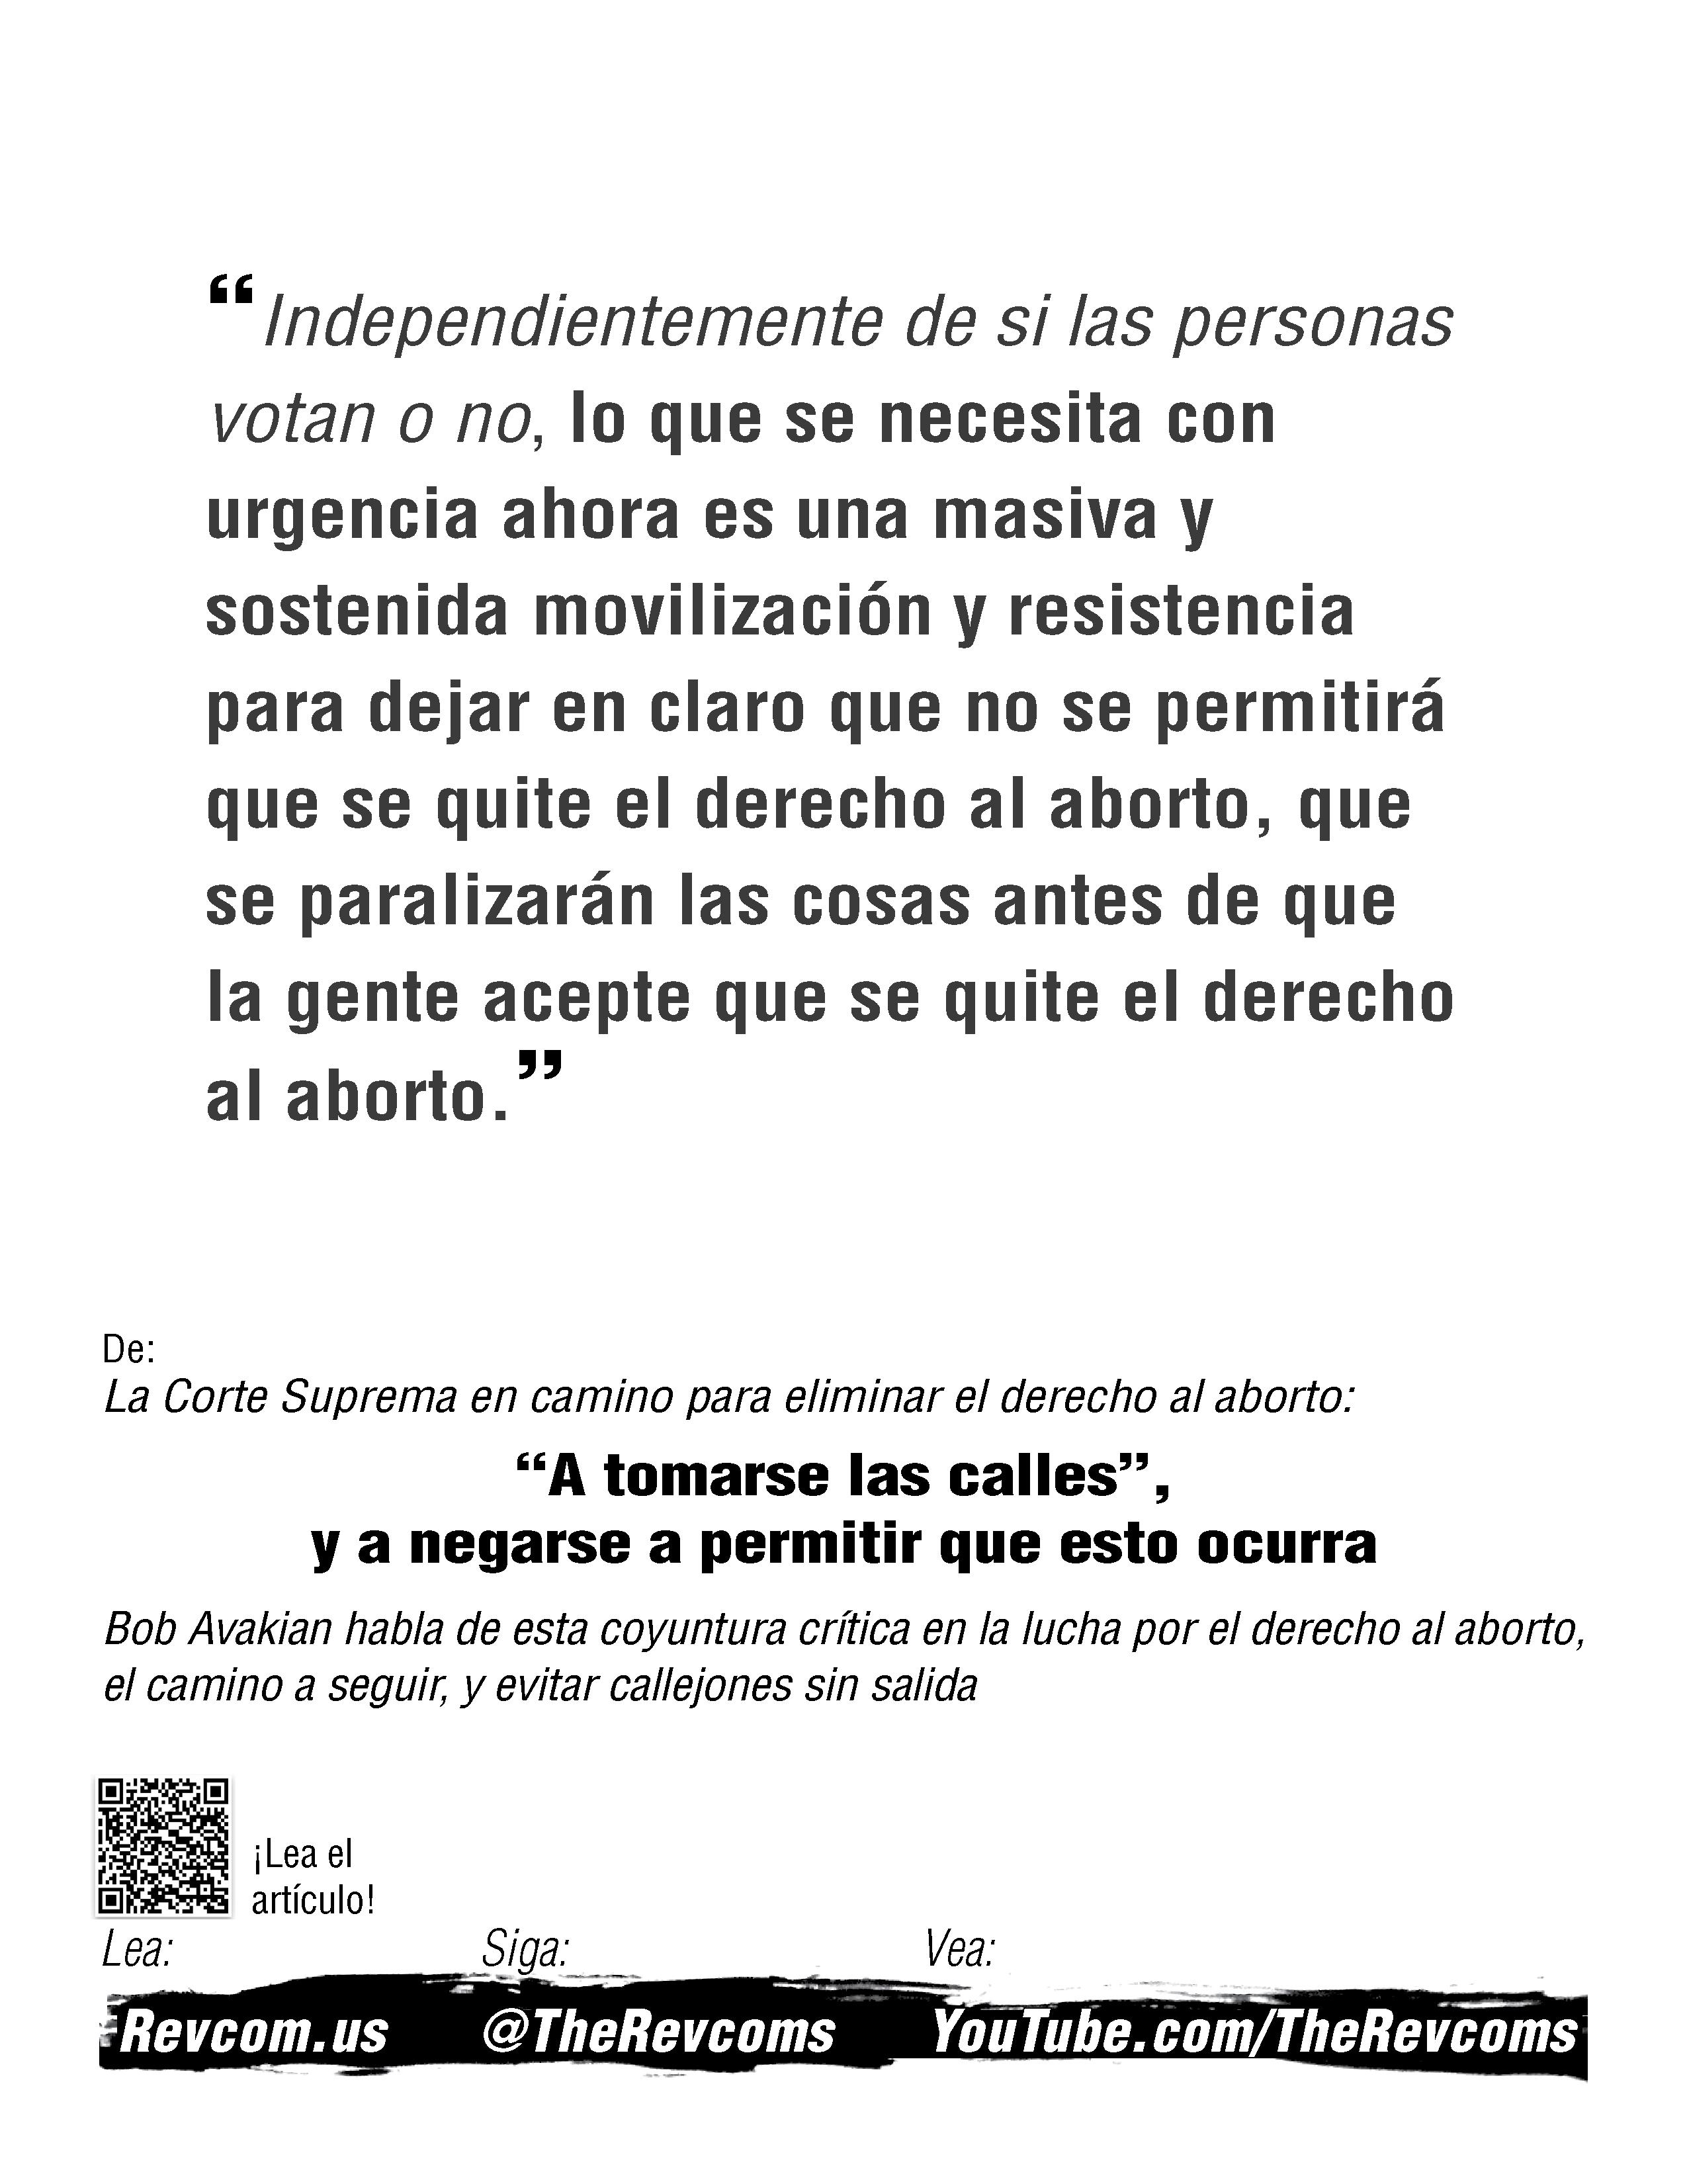 leaflet 4 quotes from BA  #1 spanish